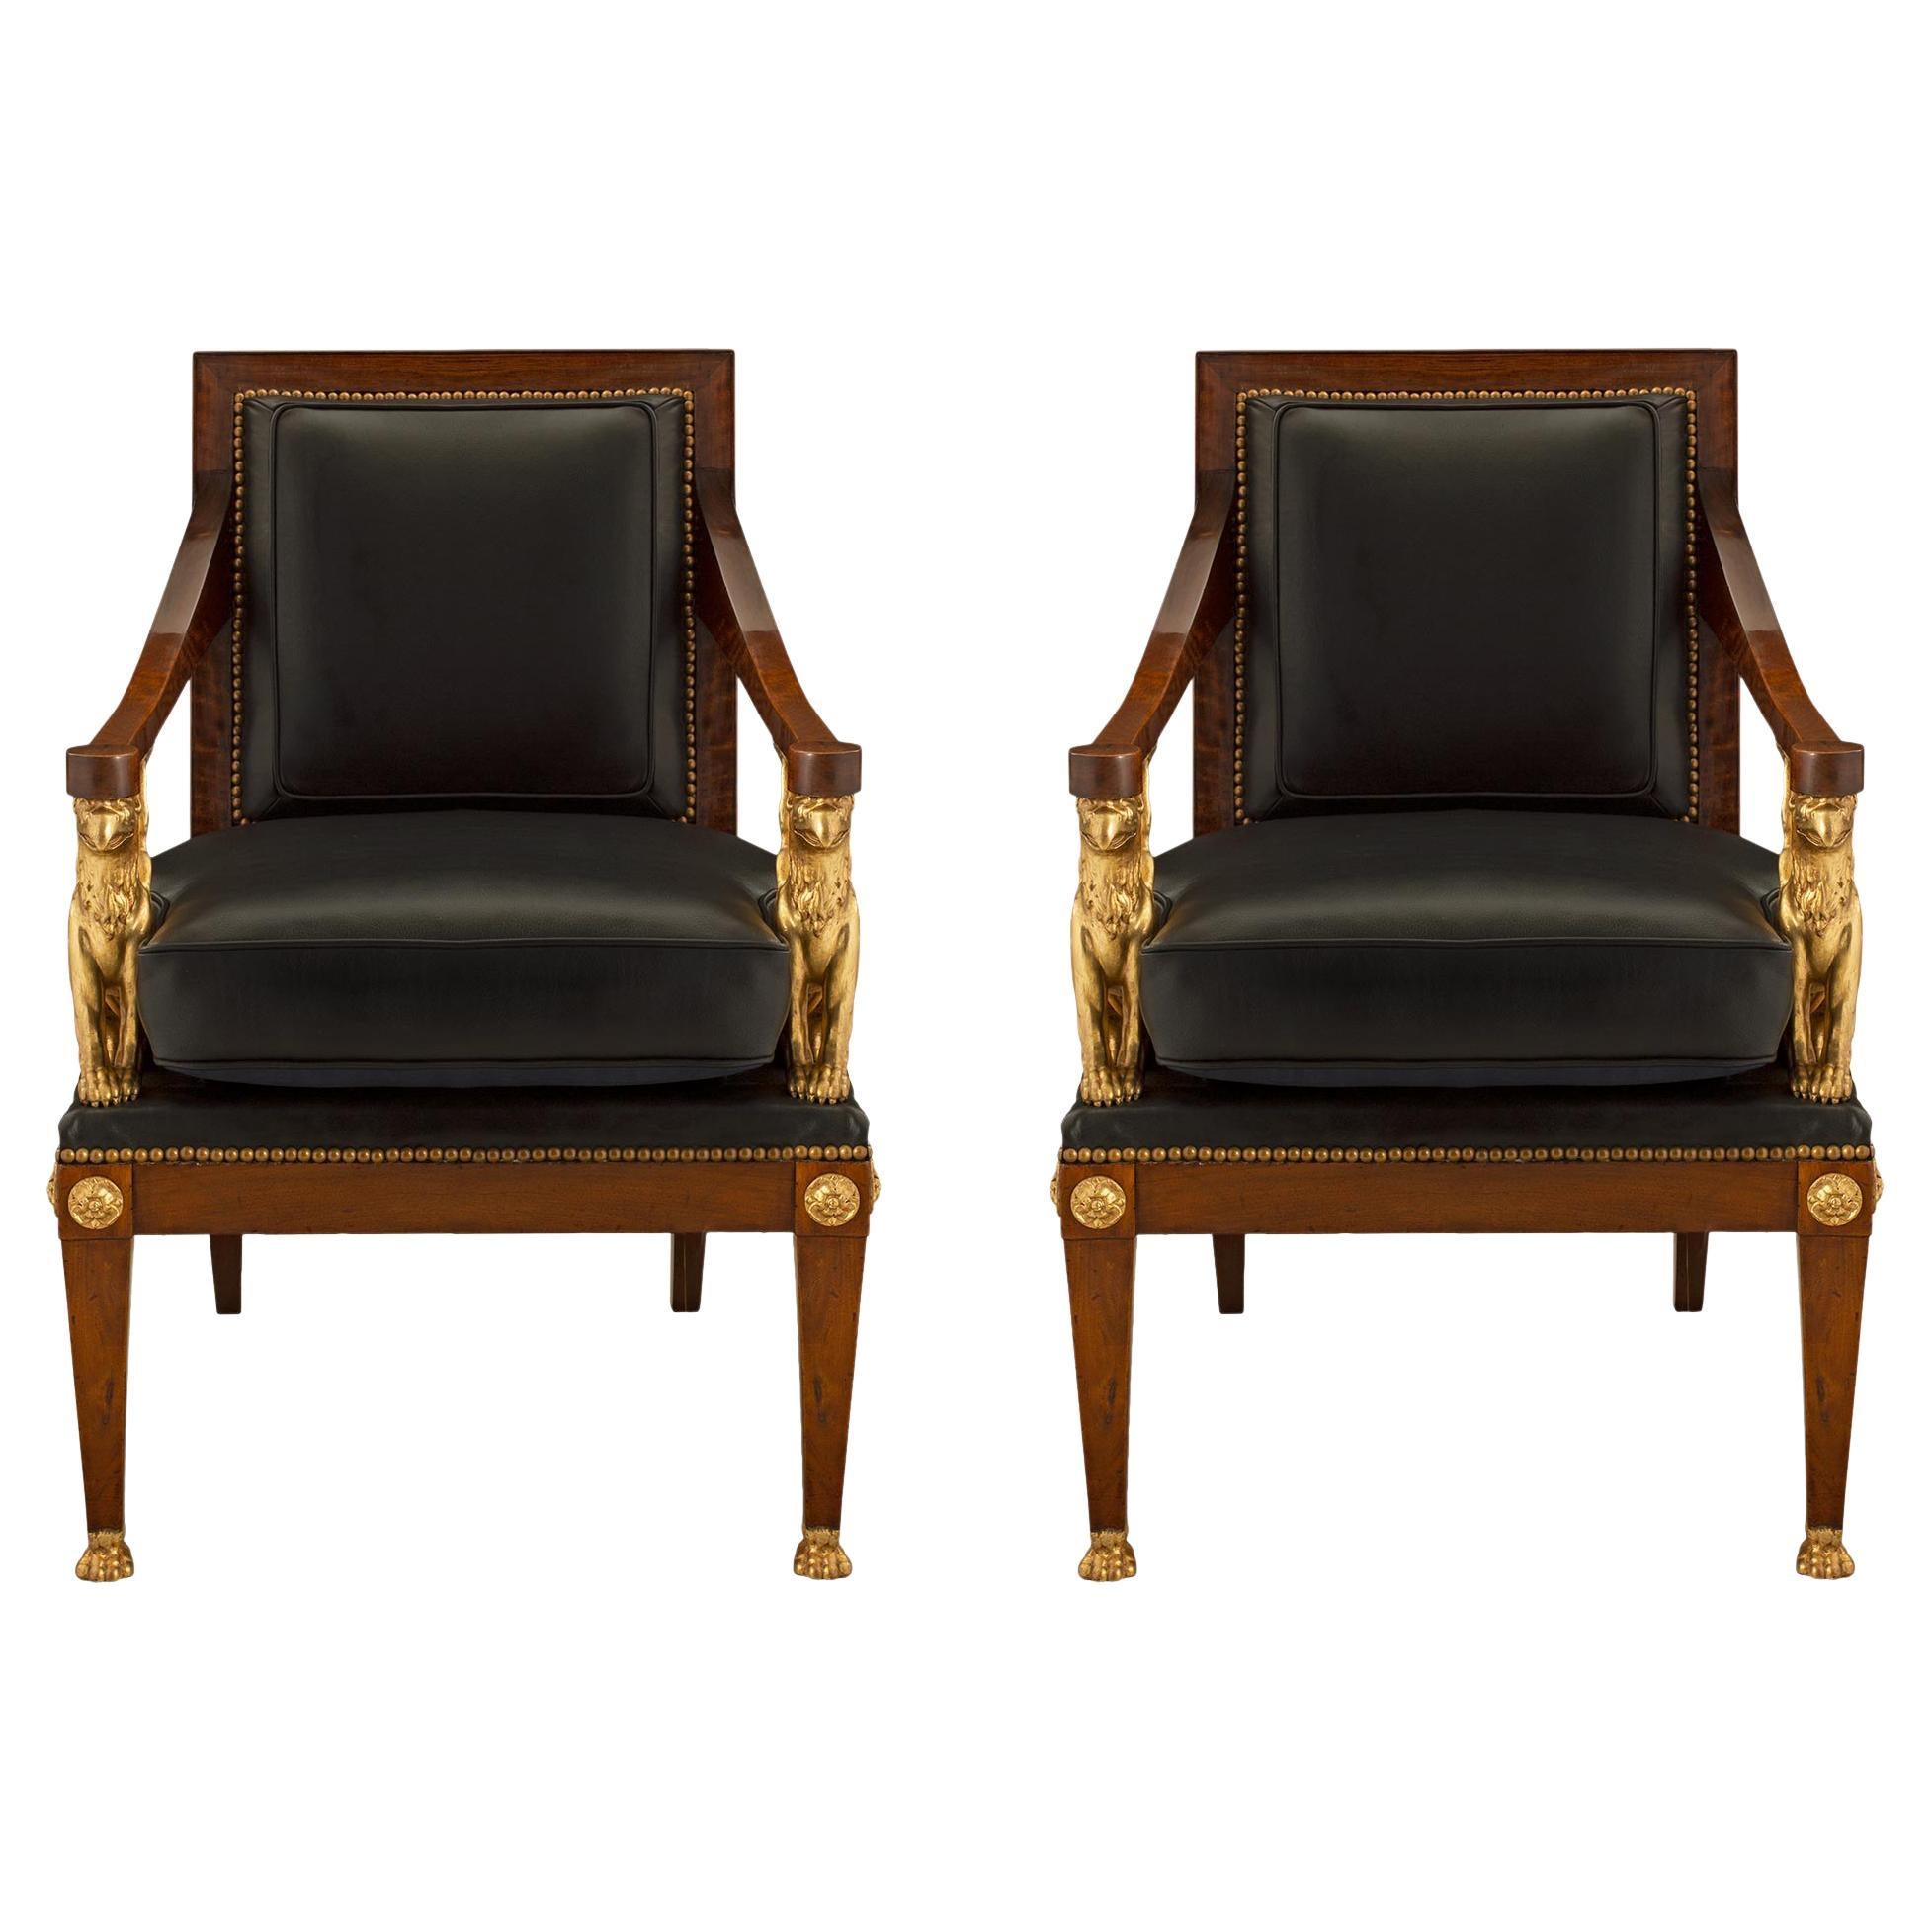 Pair of French 19th Century 1st Empire Period Walnut and Giltwood Armchairs